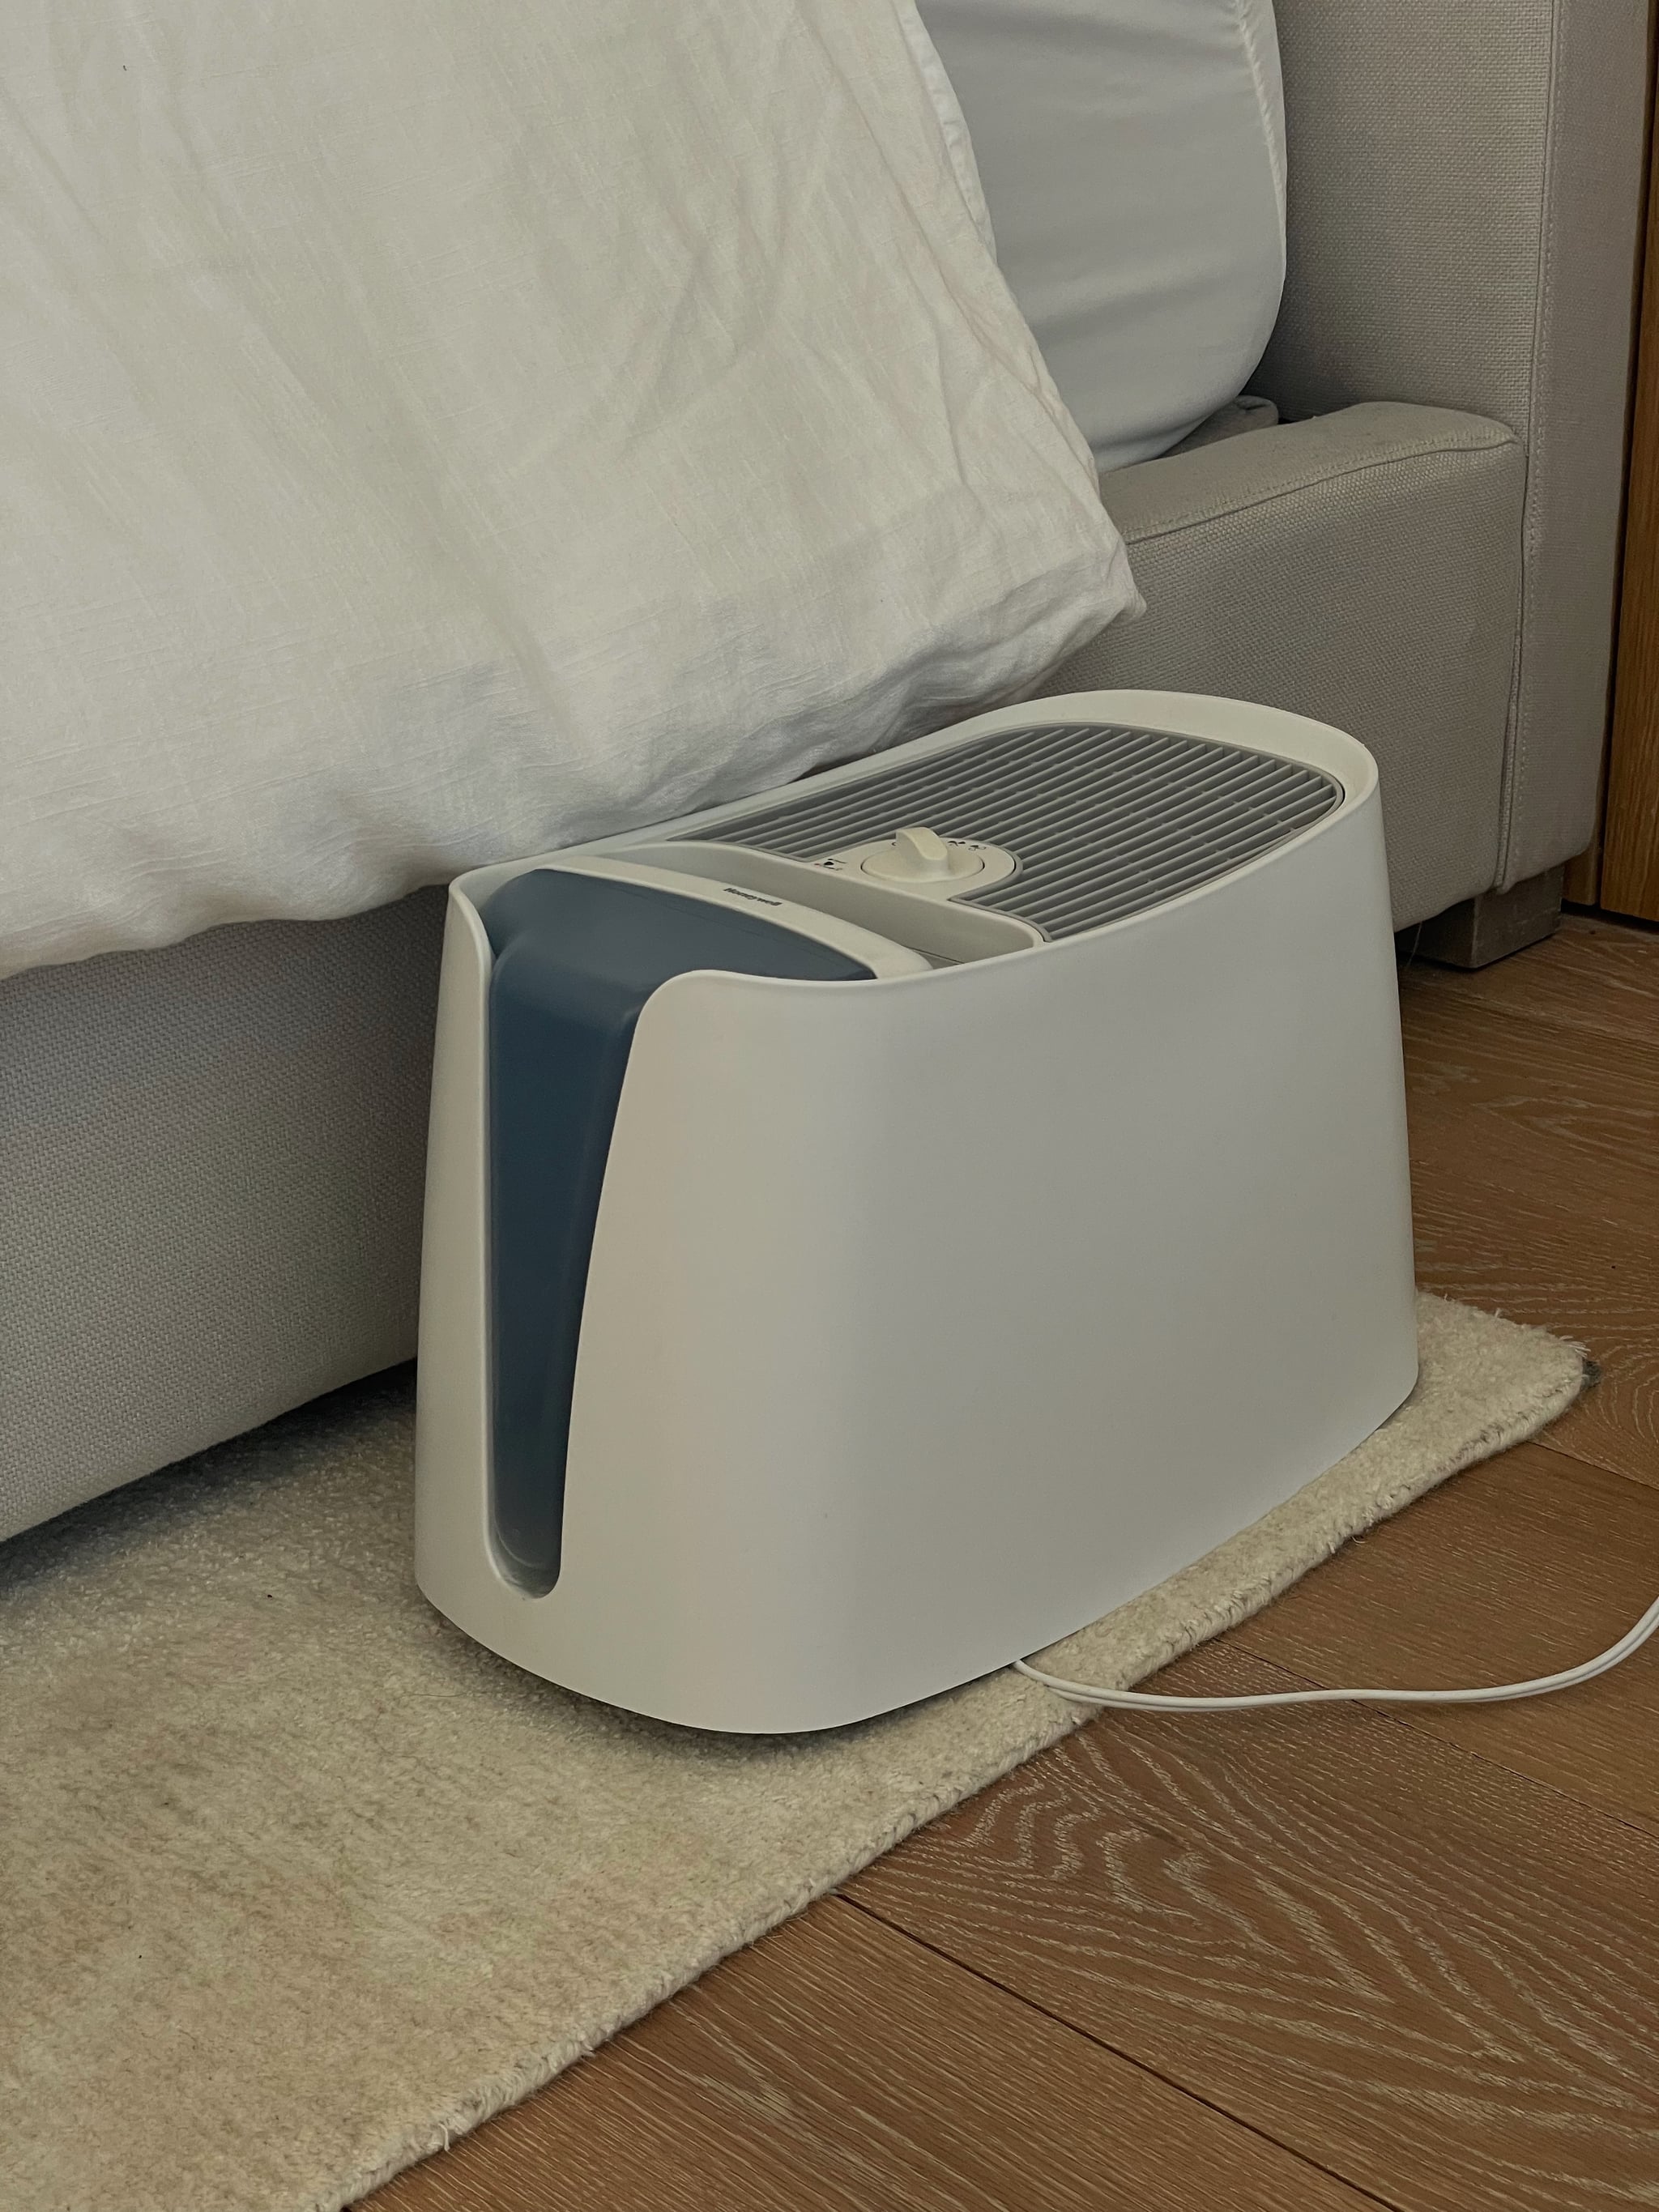 Sleeping with humidifier editor experiment